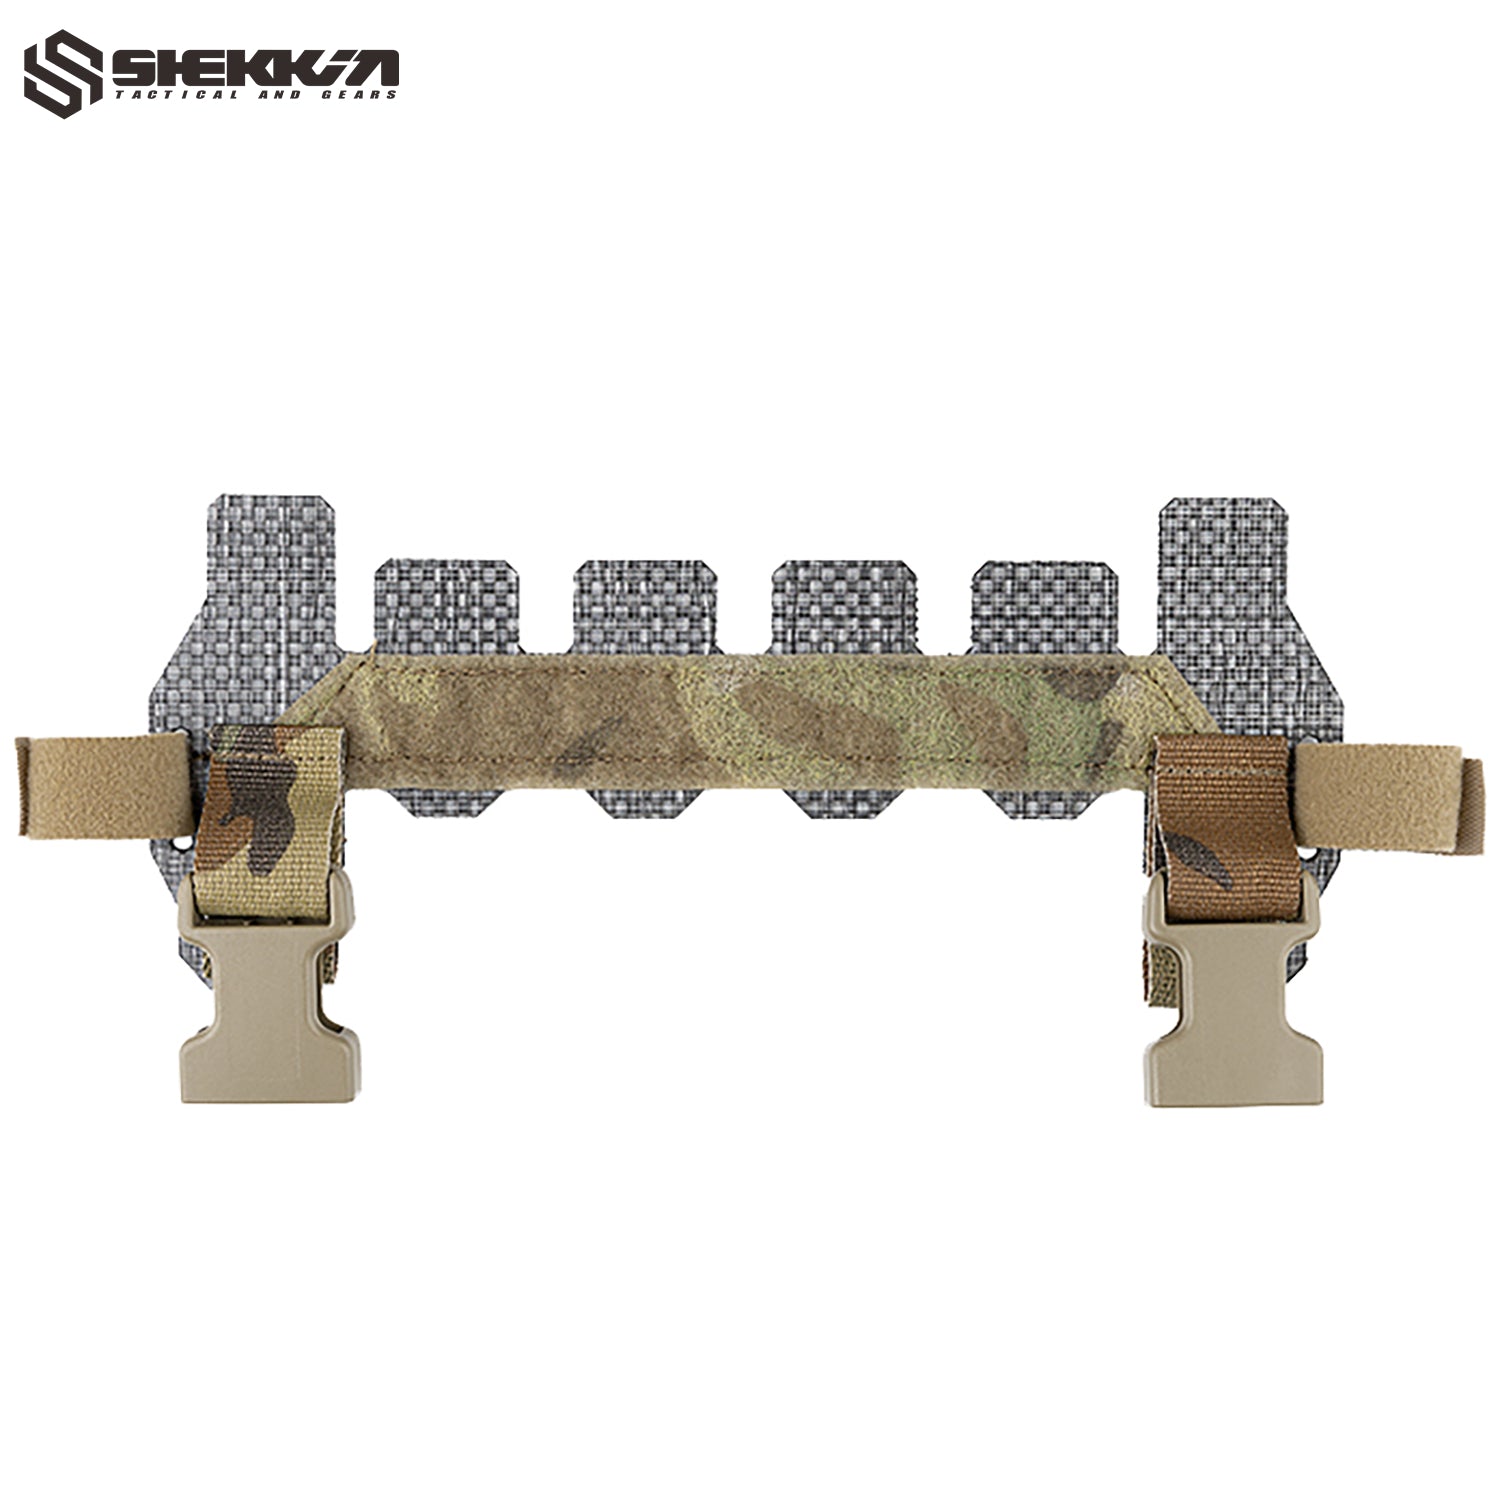 Tegris molle adapt panel for SPC - Shekkin Gears